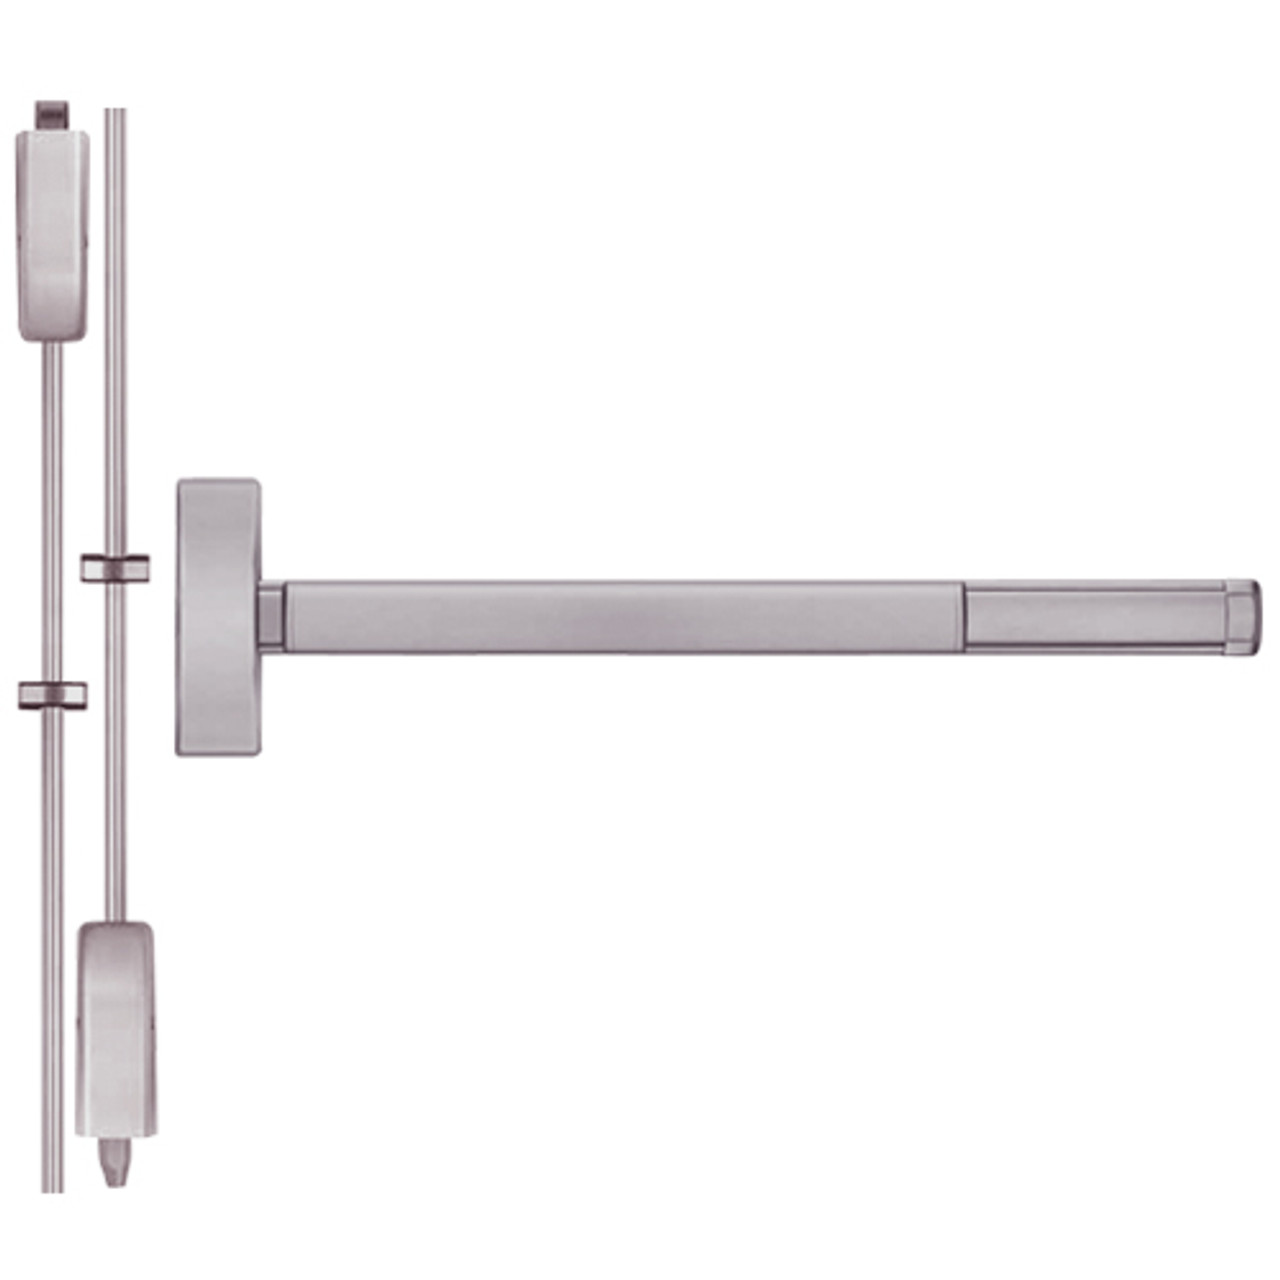 2215-630-36 PHI 2200 Series Non Fire Rated Apex Surface Vertical Rod Exit Device Prepped for Thumb Piece Always Active in Satin Stainless Steel Finish